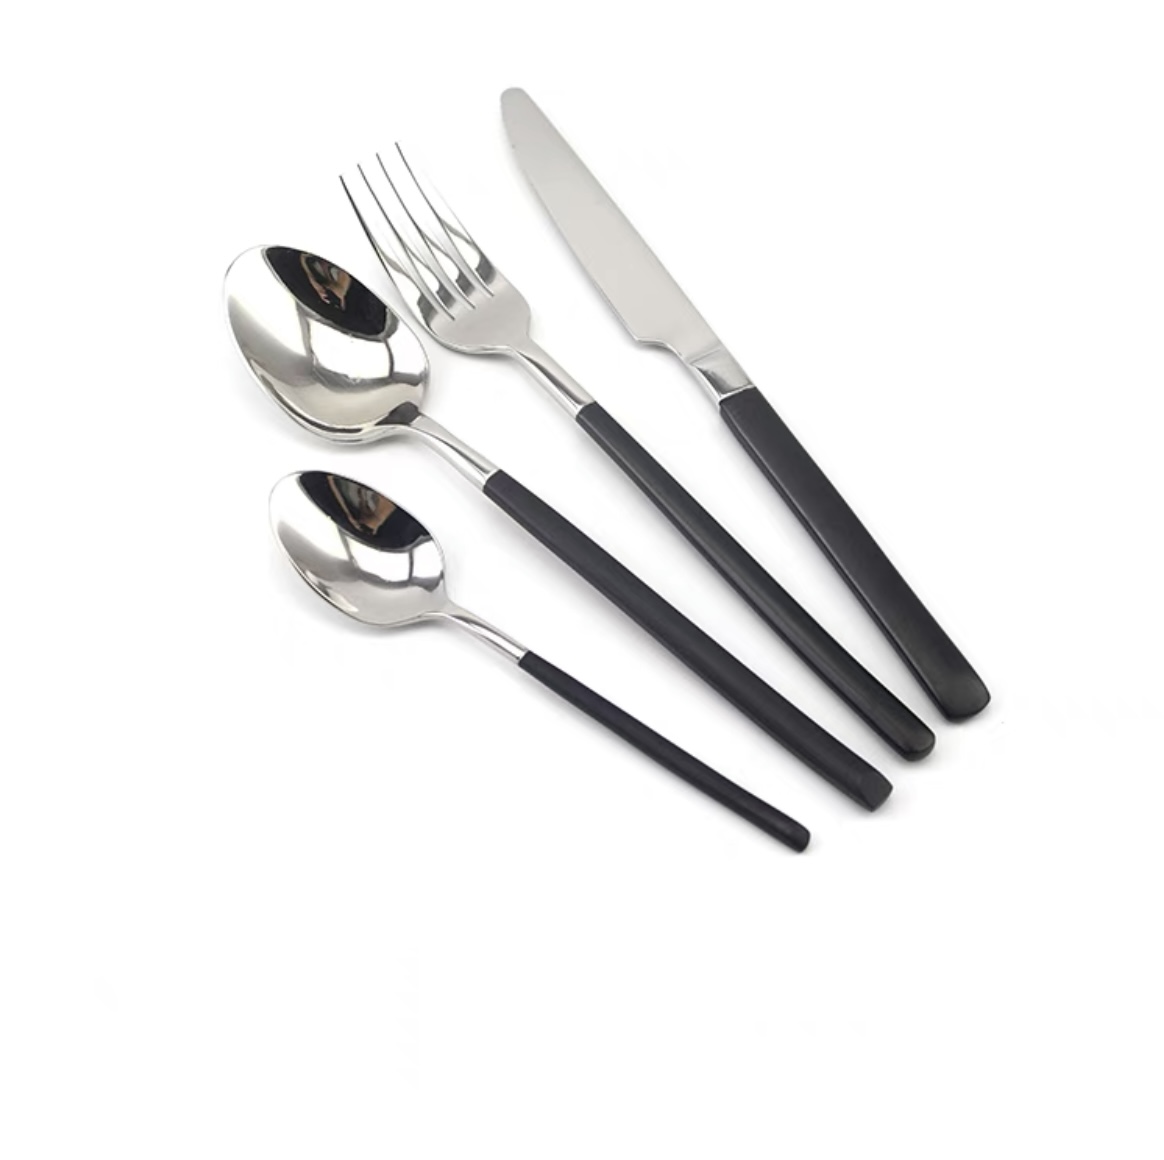 🍴 Elevate your dining experience with our unique cutlery. The modern design and eye-catching colors make it a standout addition to any table setting. 
#cutlery #cutleryset #culinary #kitchenware #tableware #silverware  #ModernDesign  #TableSetting #manufacturing #factory